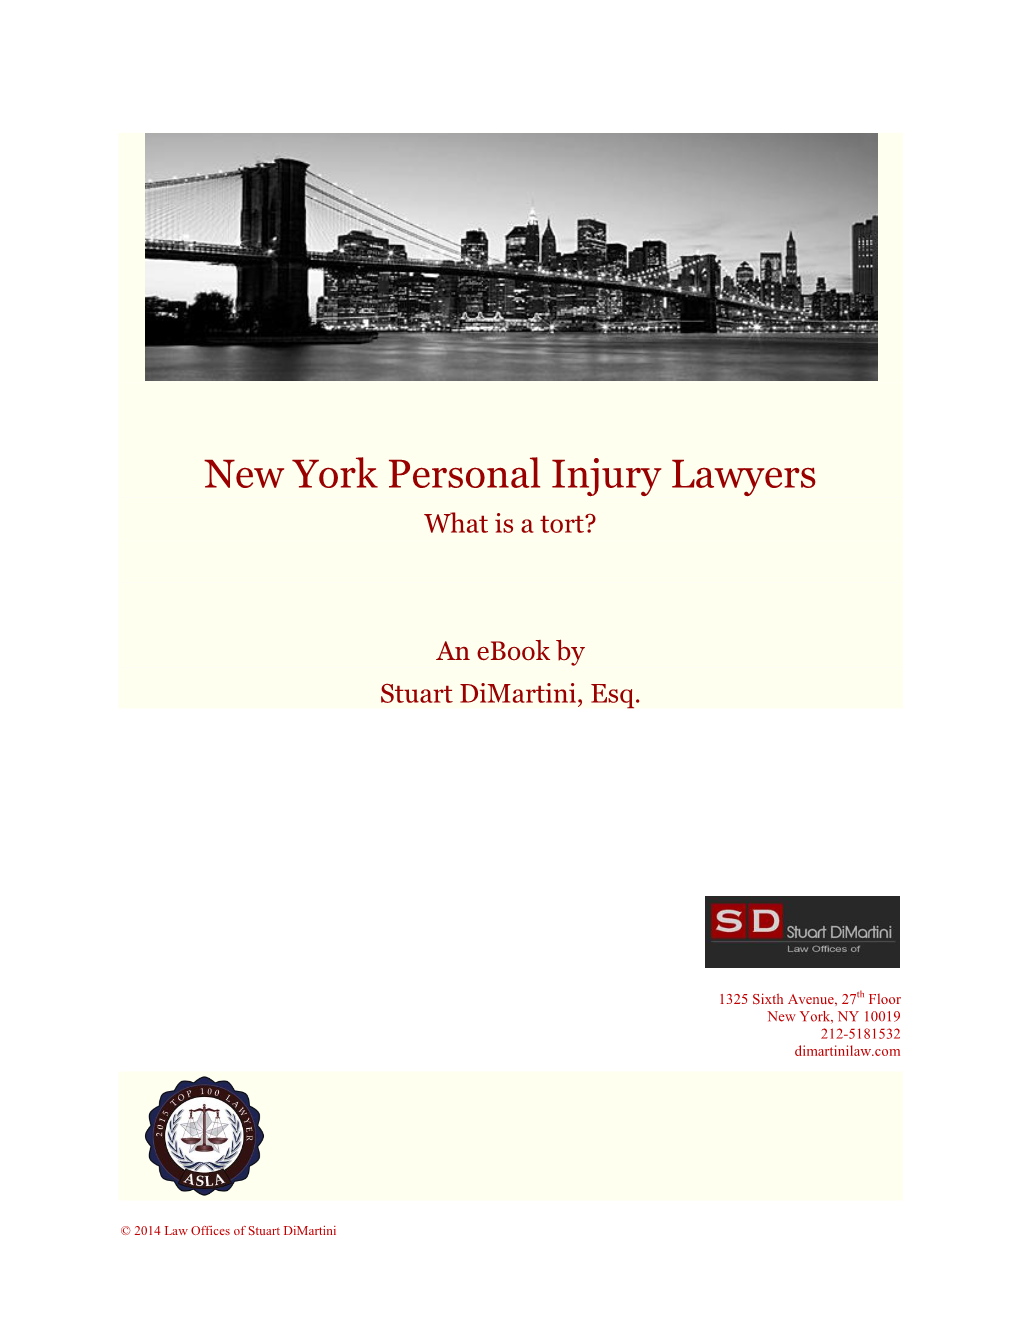 New York Personal Injury Lawyers What Is a Tort?